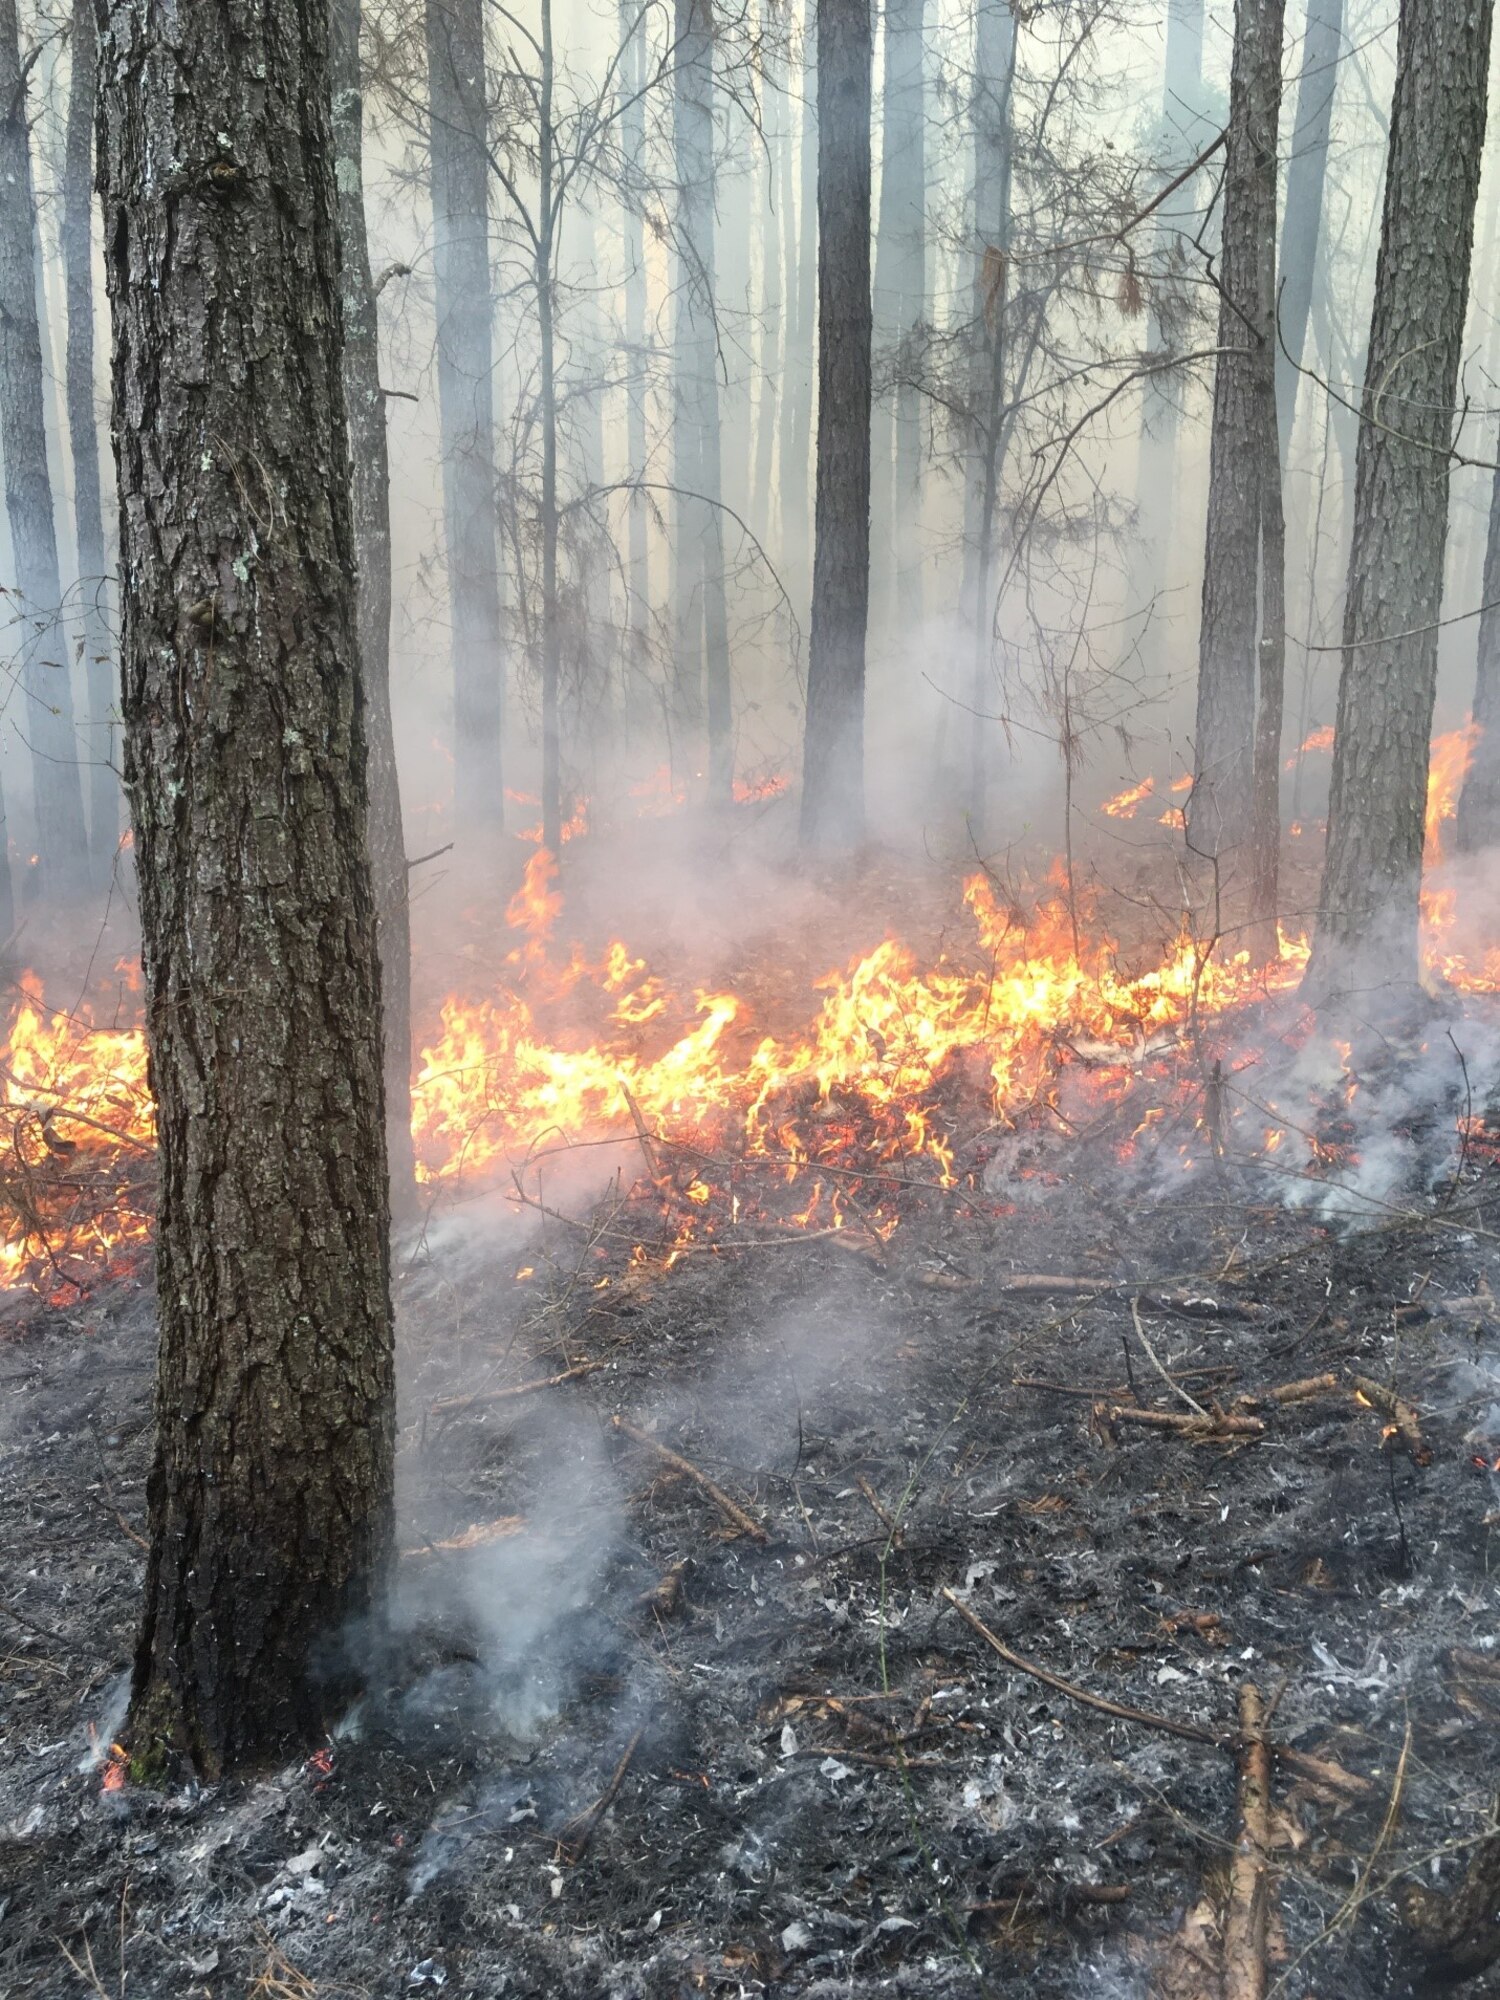 Prescribed fire is the most efficient and economical tool when managing natural ecosystems, allowing land managers to alter and improve the native ecosystems without utilizing more costly methods such as bush hogging, under brushing, and herbicide applications. Pictured is a prescribed fire, or controlled burn, at Arnold Air Force Base. (Courtesy photo)